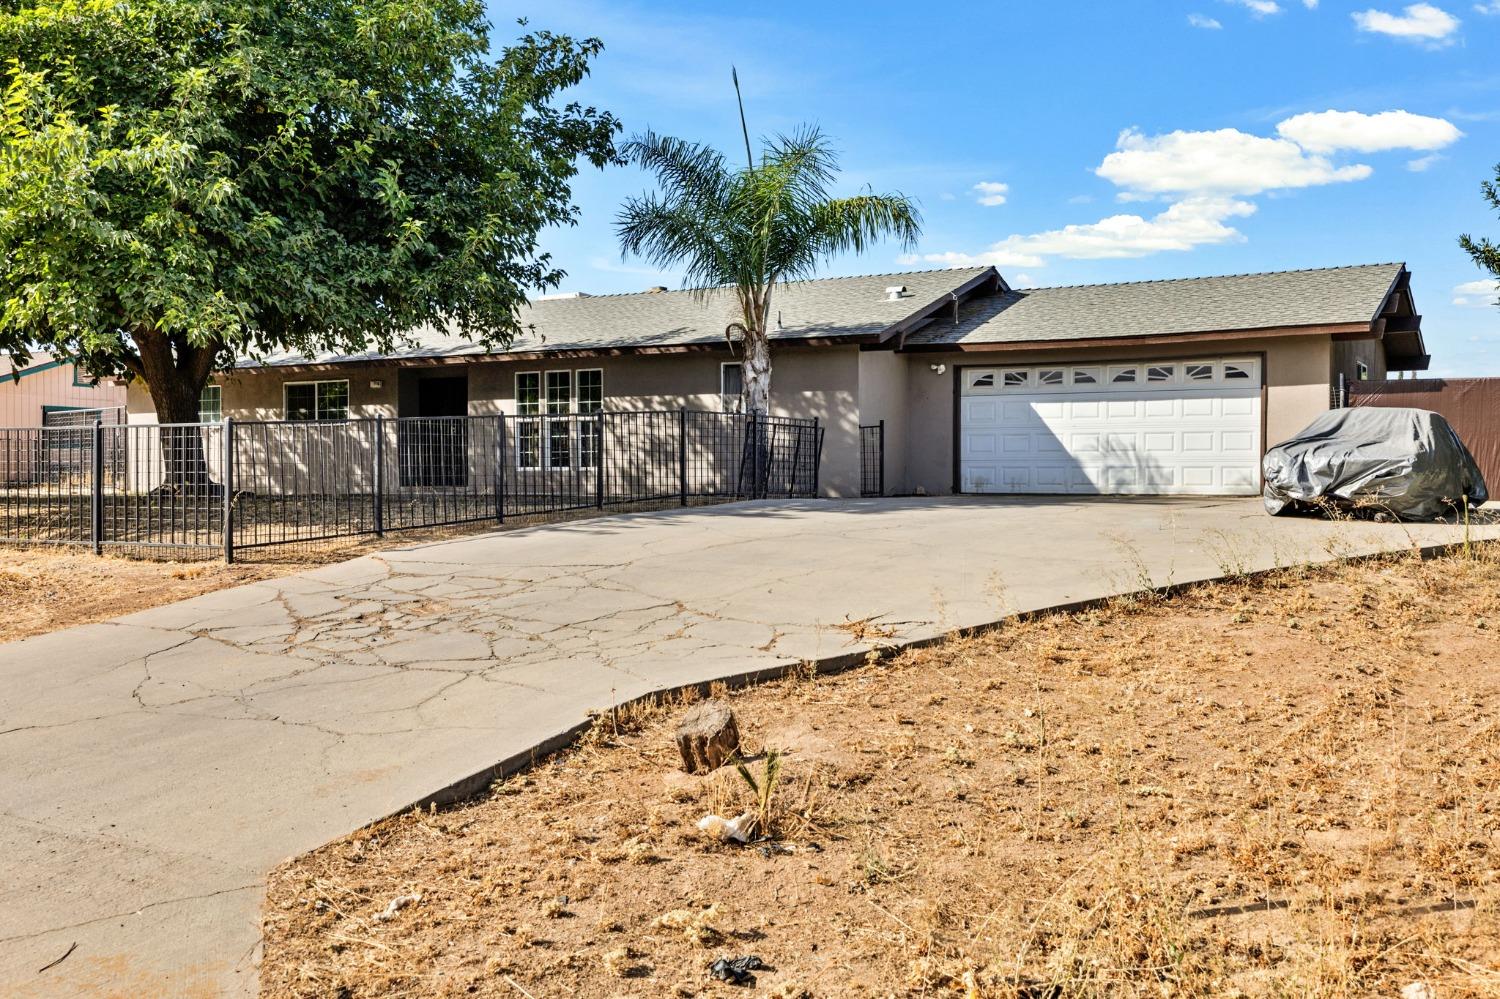 Photo of 17316 Camden Dr in Madera, CA